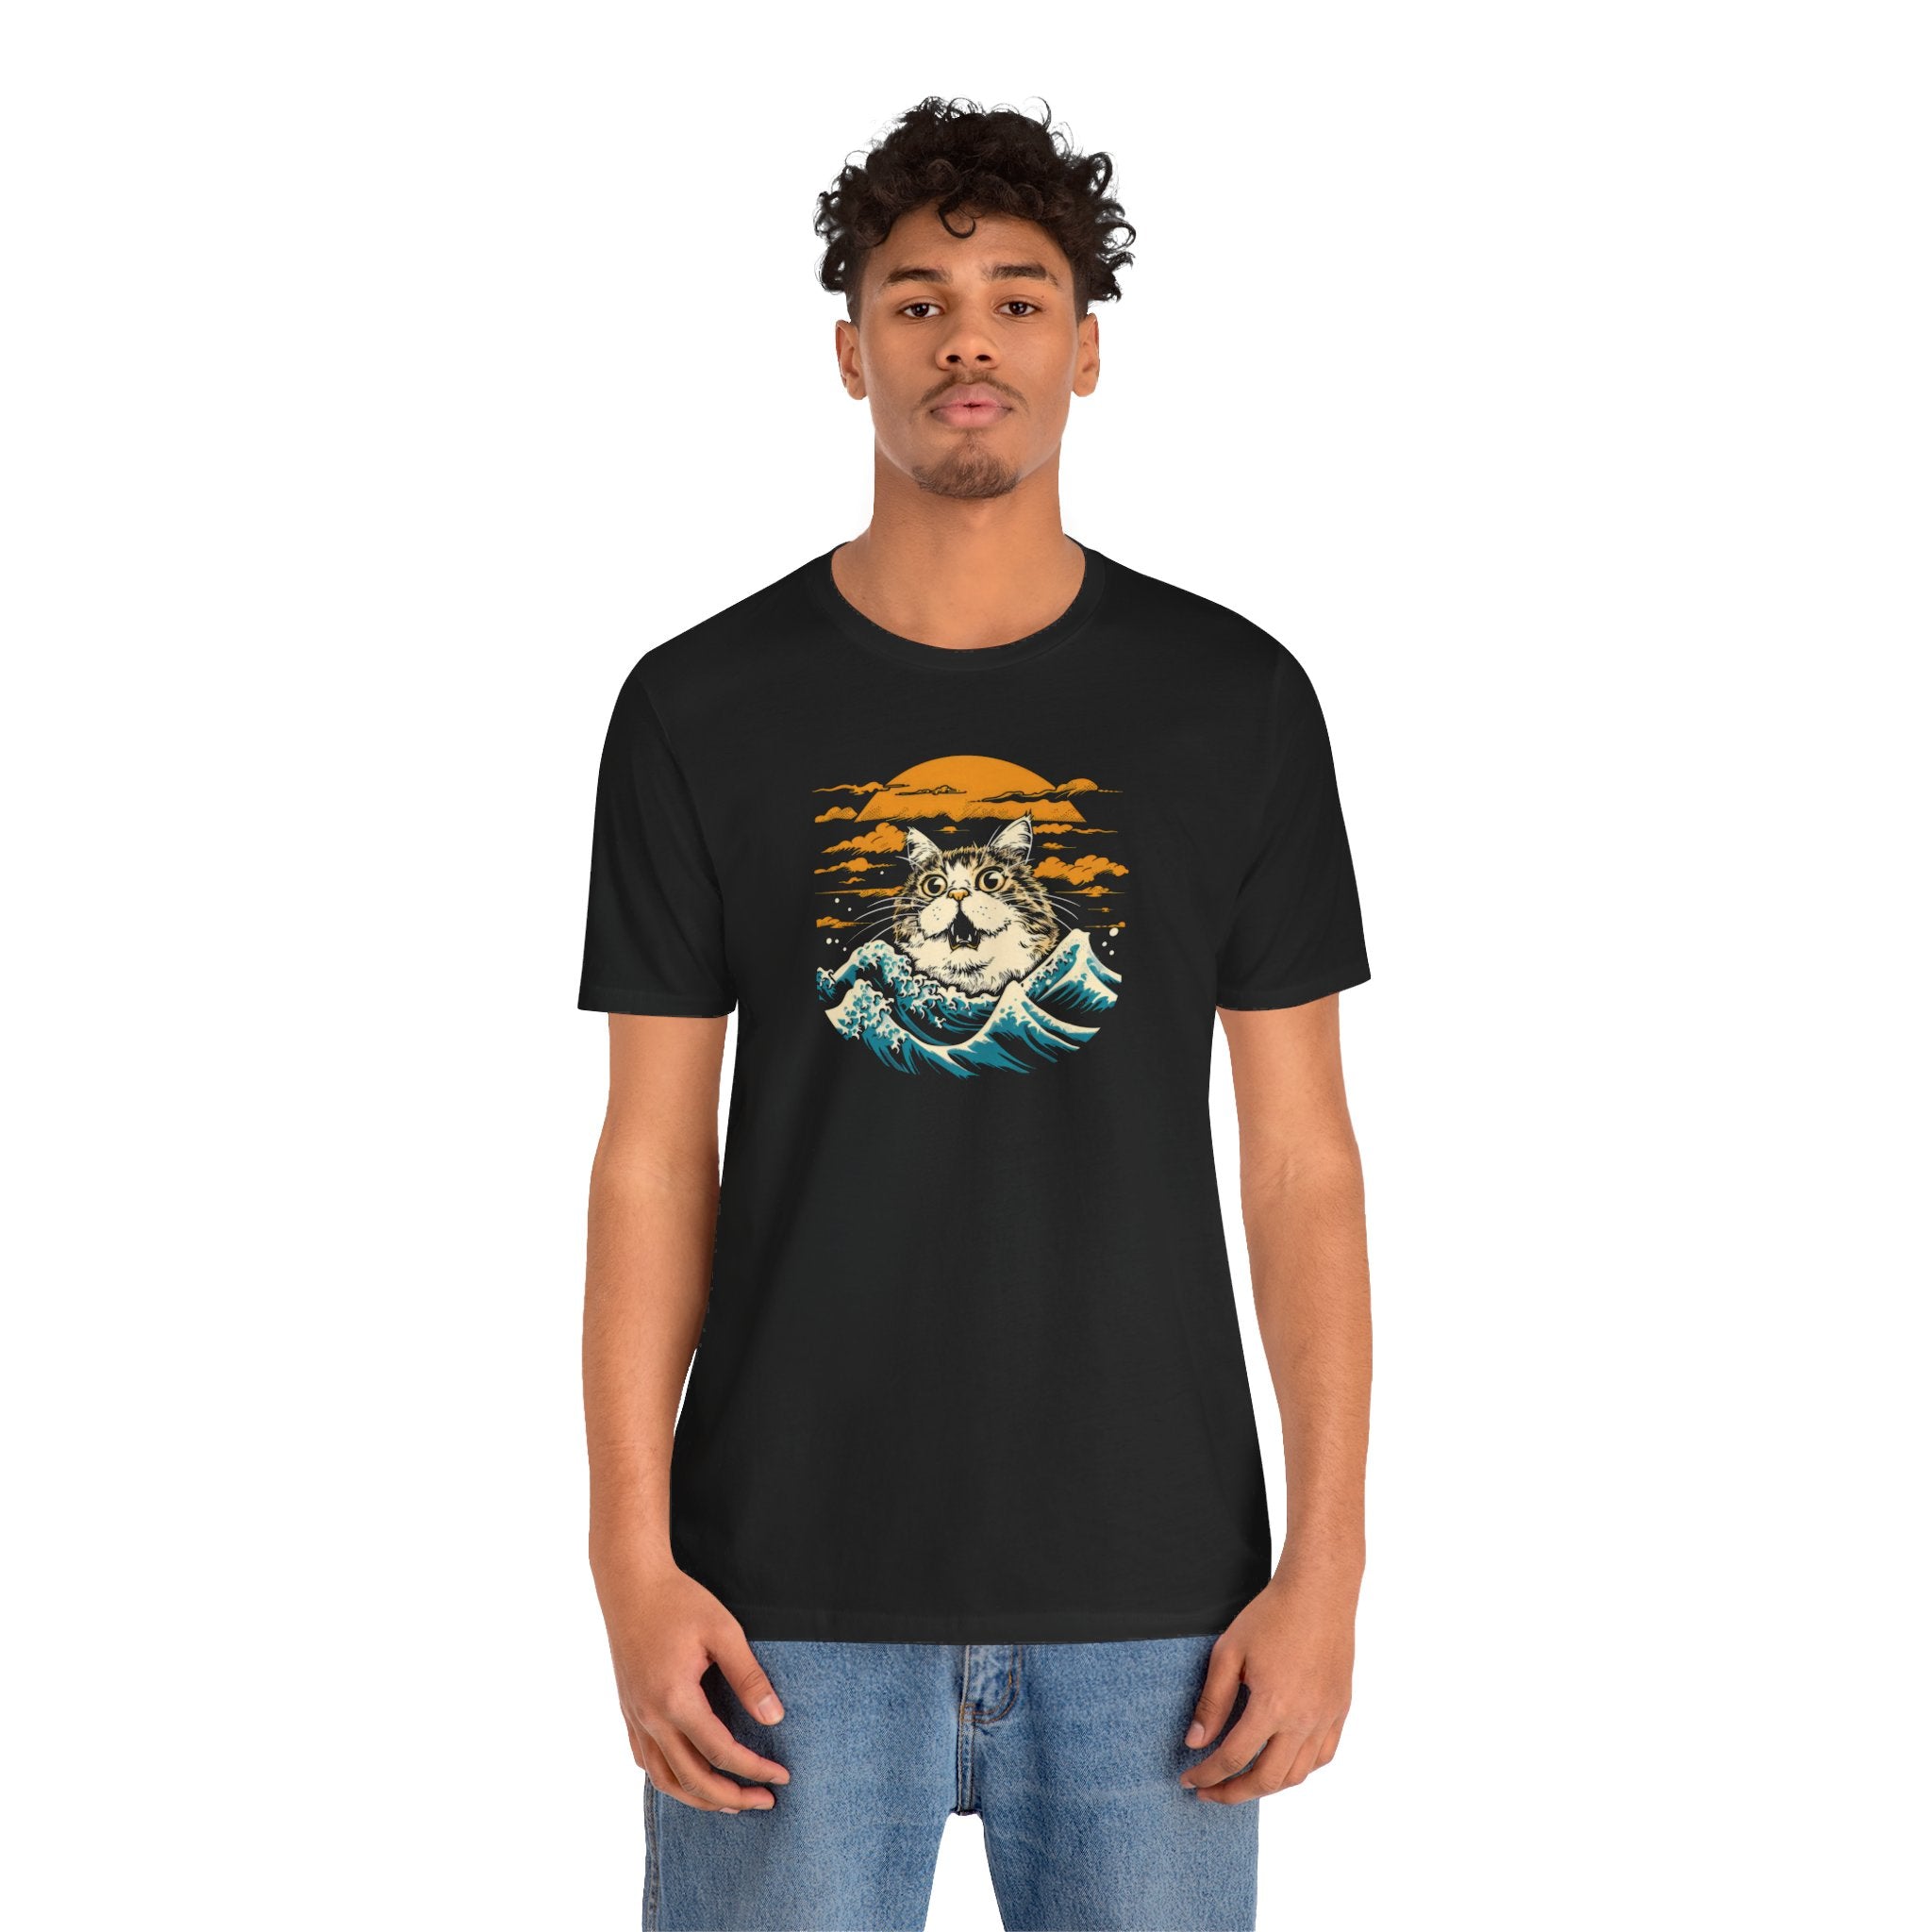 Cat in Sunset Waves T-Shirt